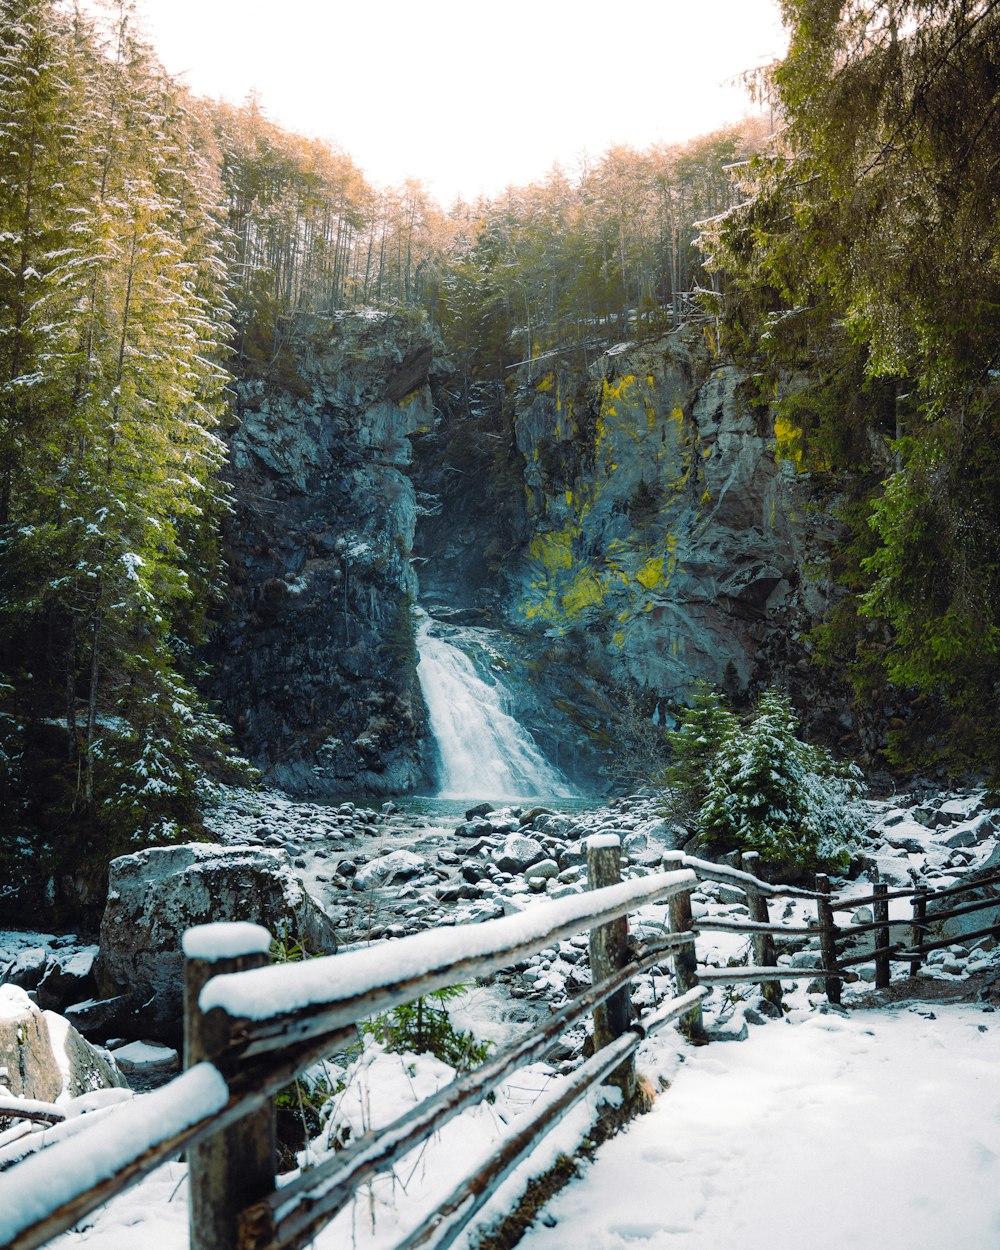 a waterfall in a snowy place